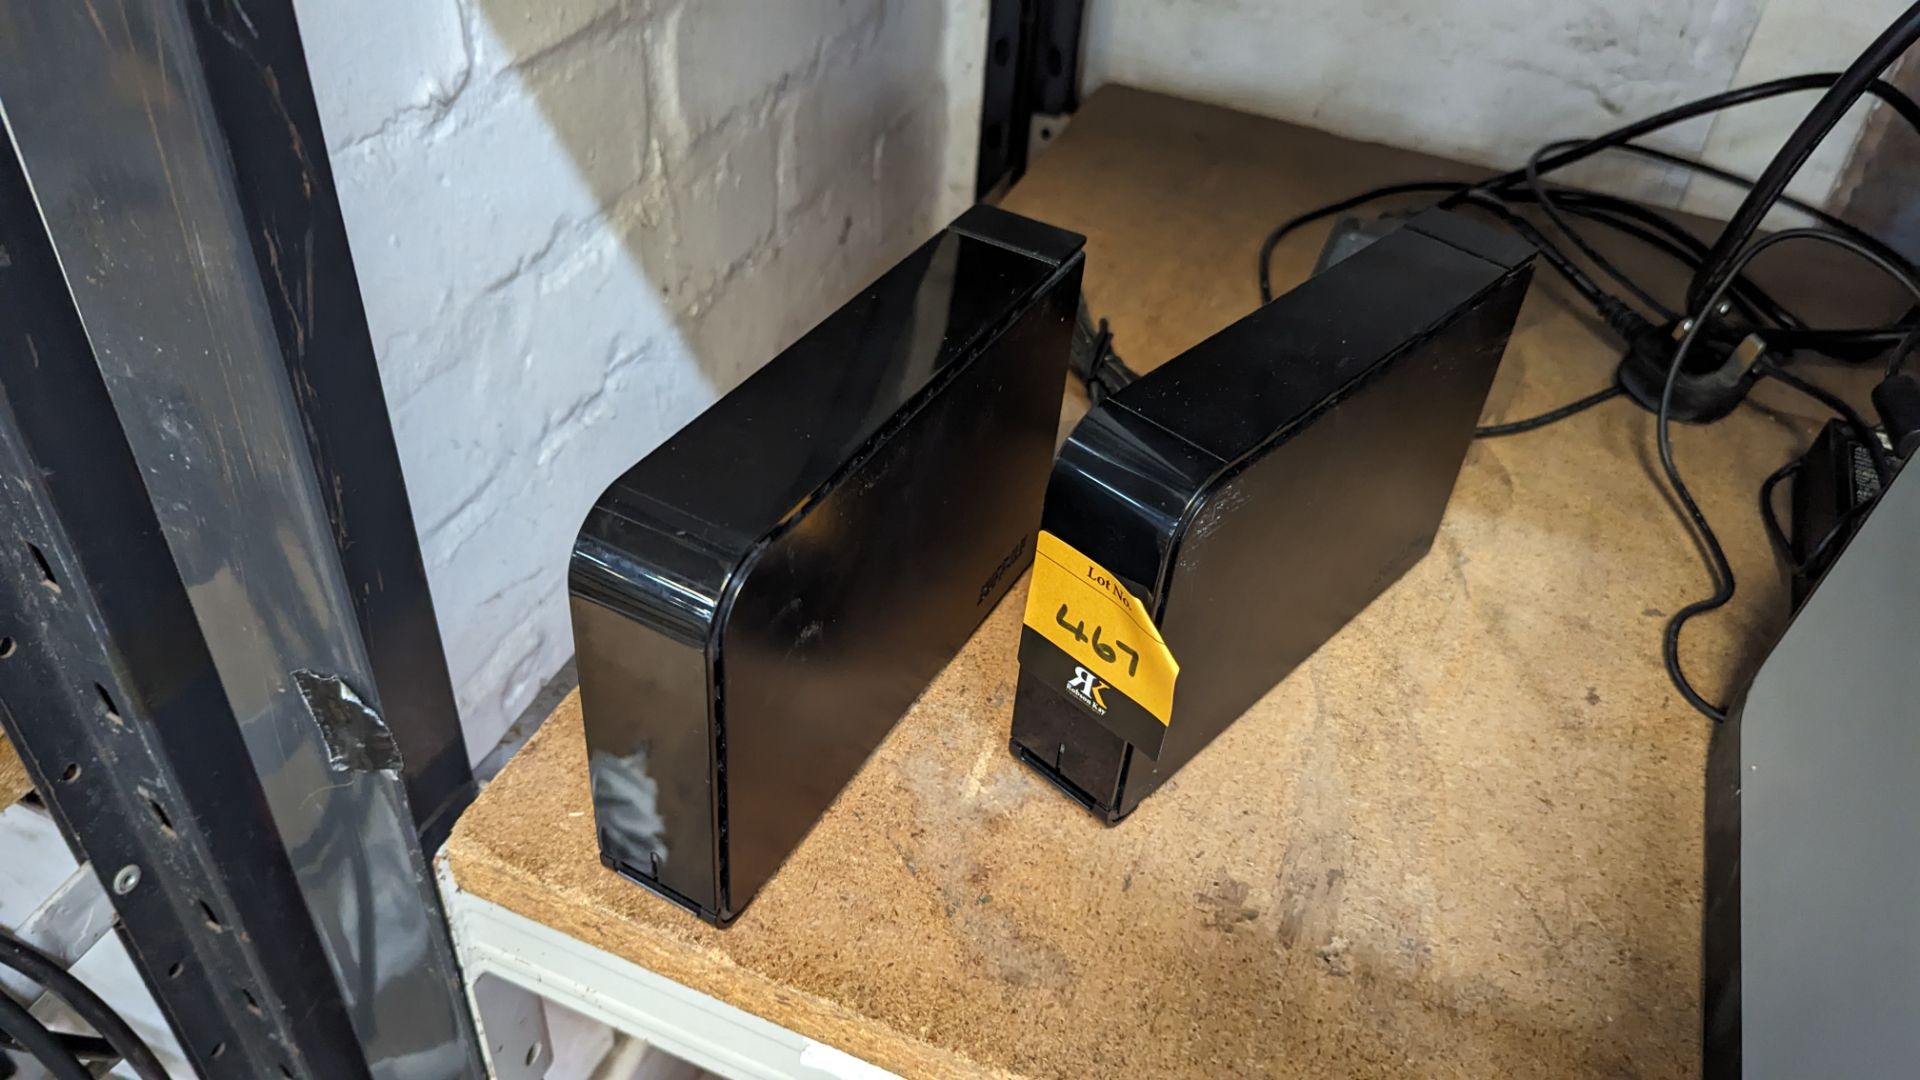 2 off Buffalo external hard drives. NB only 1 power supply - Image 3 of 5